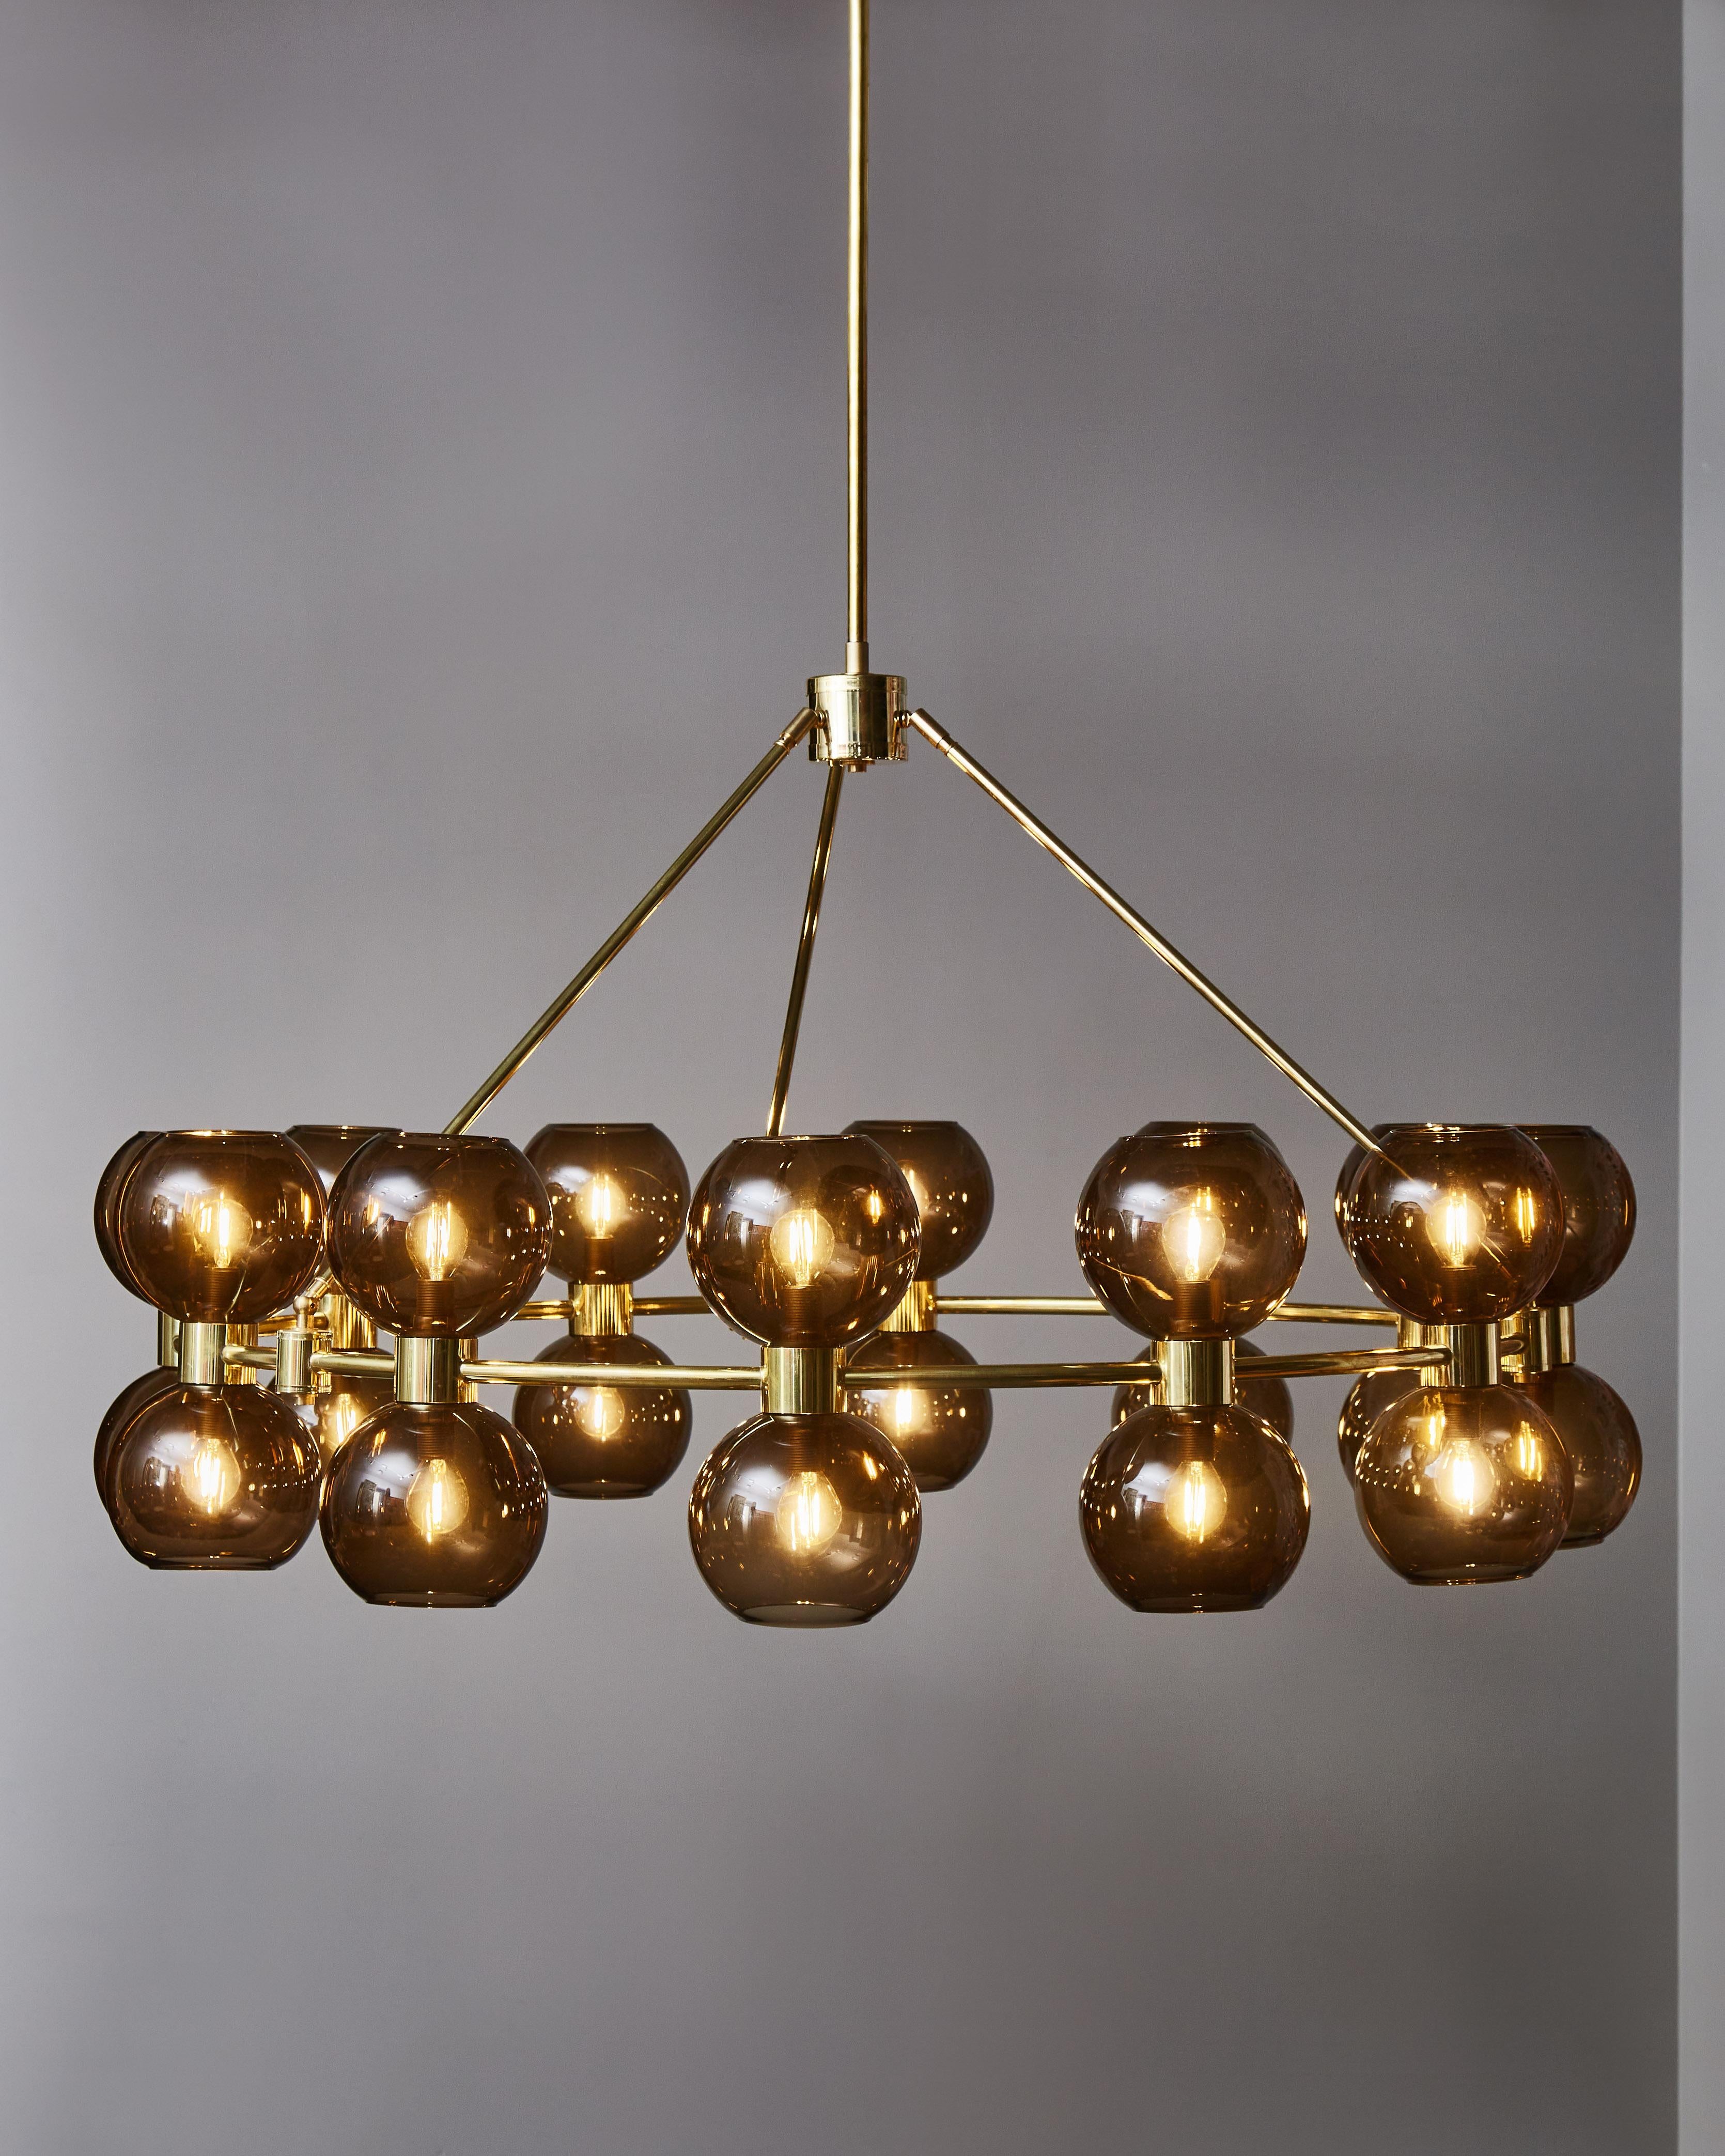 Round brass chandelier with twenty-four light sources each covered with brown tinted glass globes. The main hoop is by three rods joining the central stem.